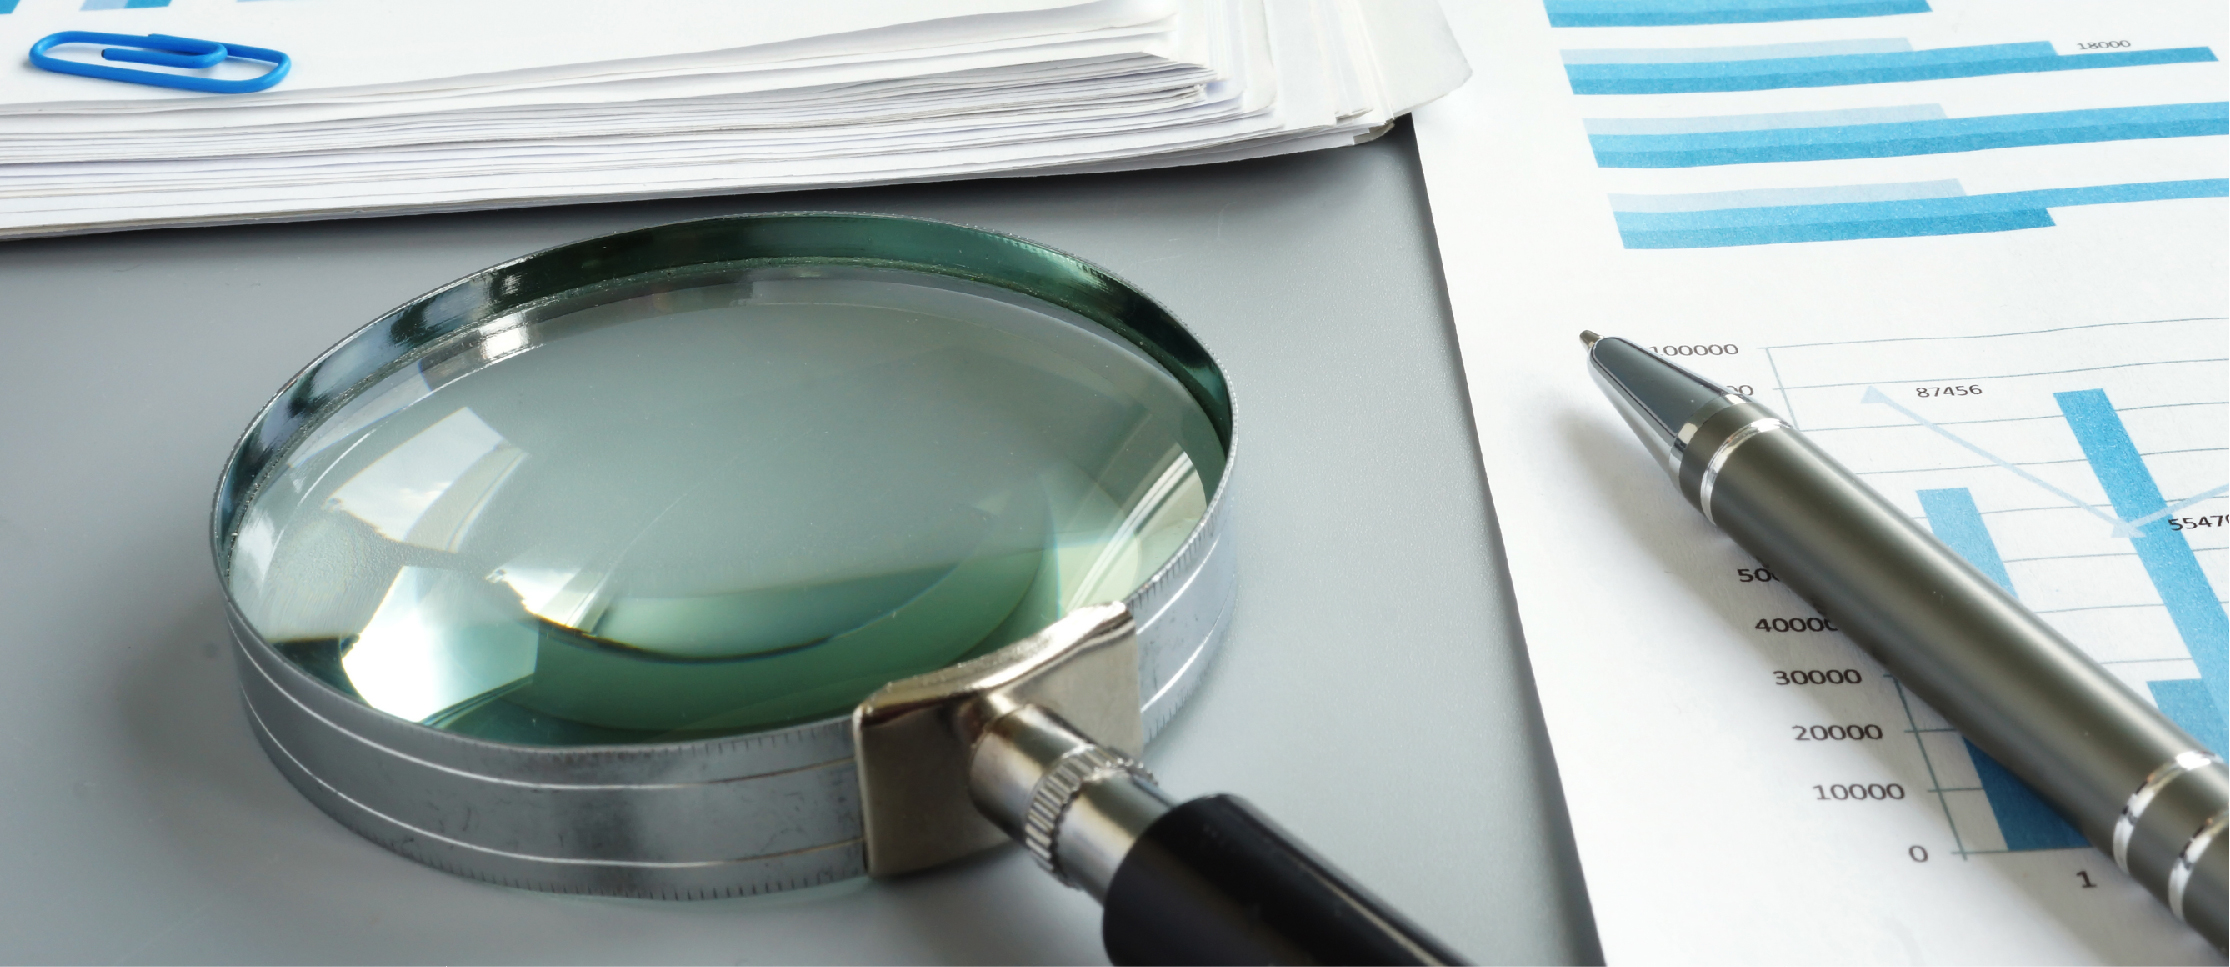 image of magnifying glass and documents